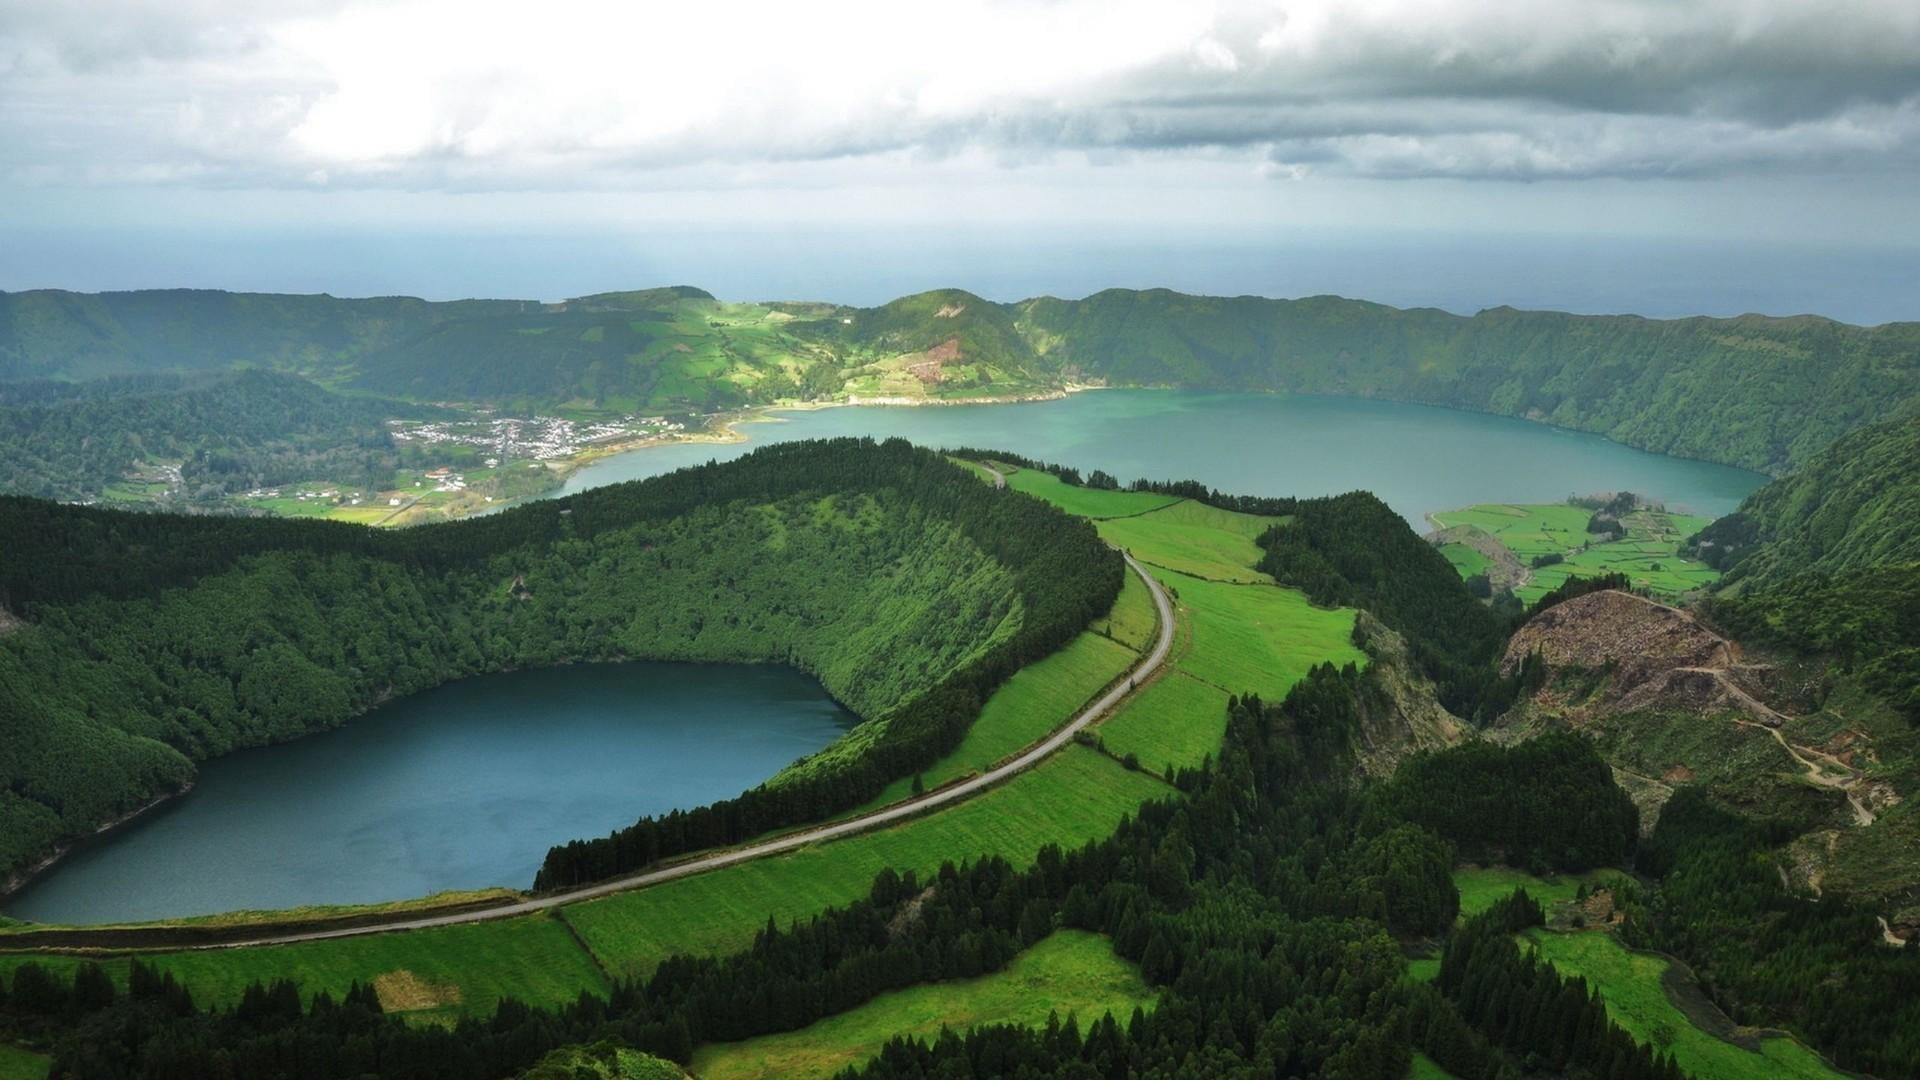 azores, lake, portugal, landscape, europe, sky, clouds, crater lake